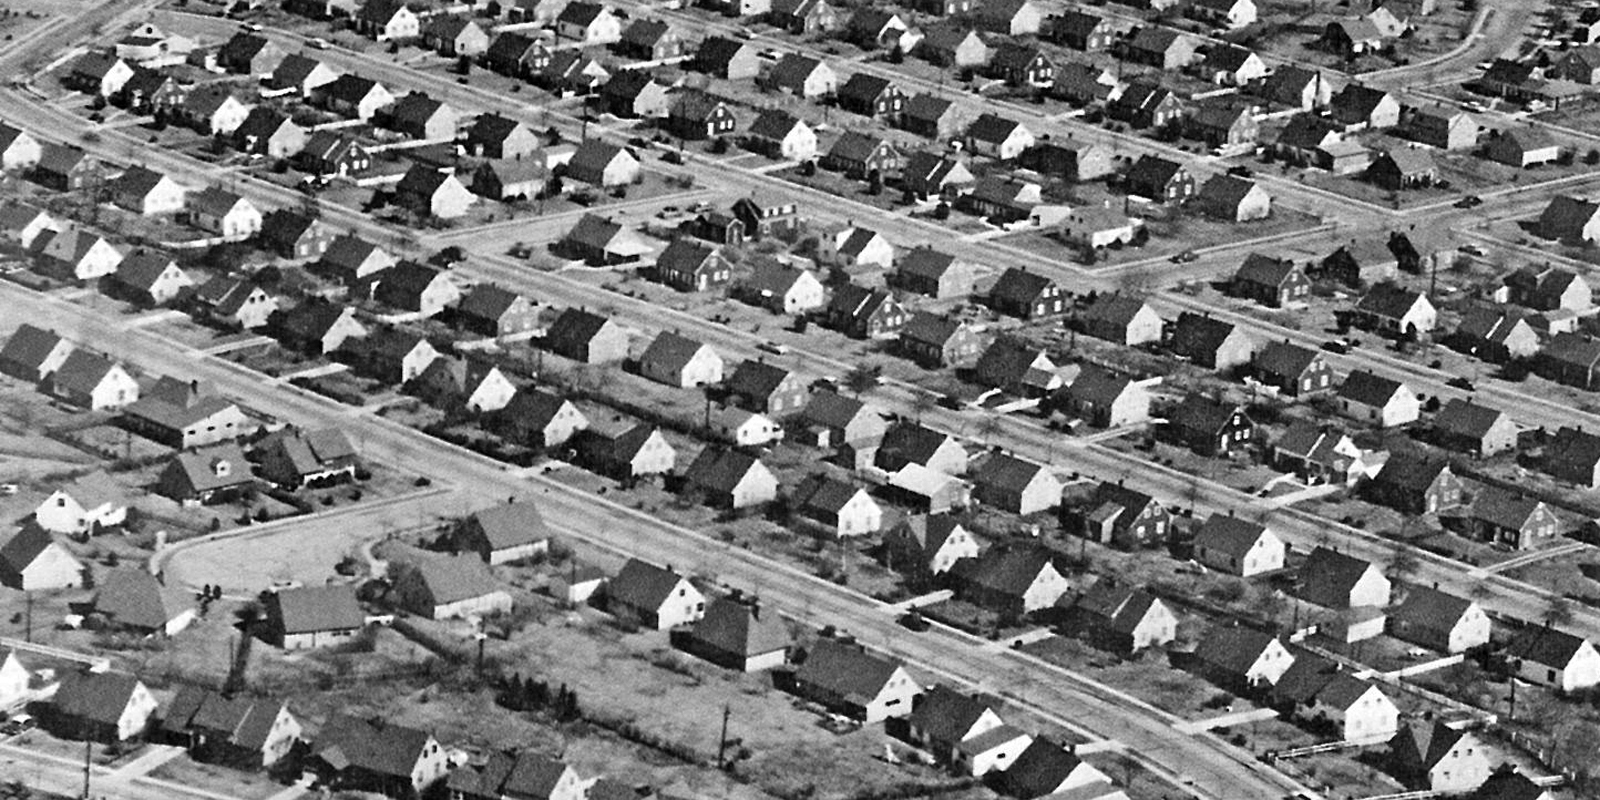 Photograph of lines of identical-looking houses in even rows.